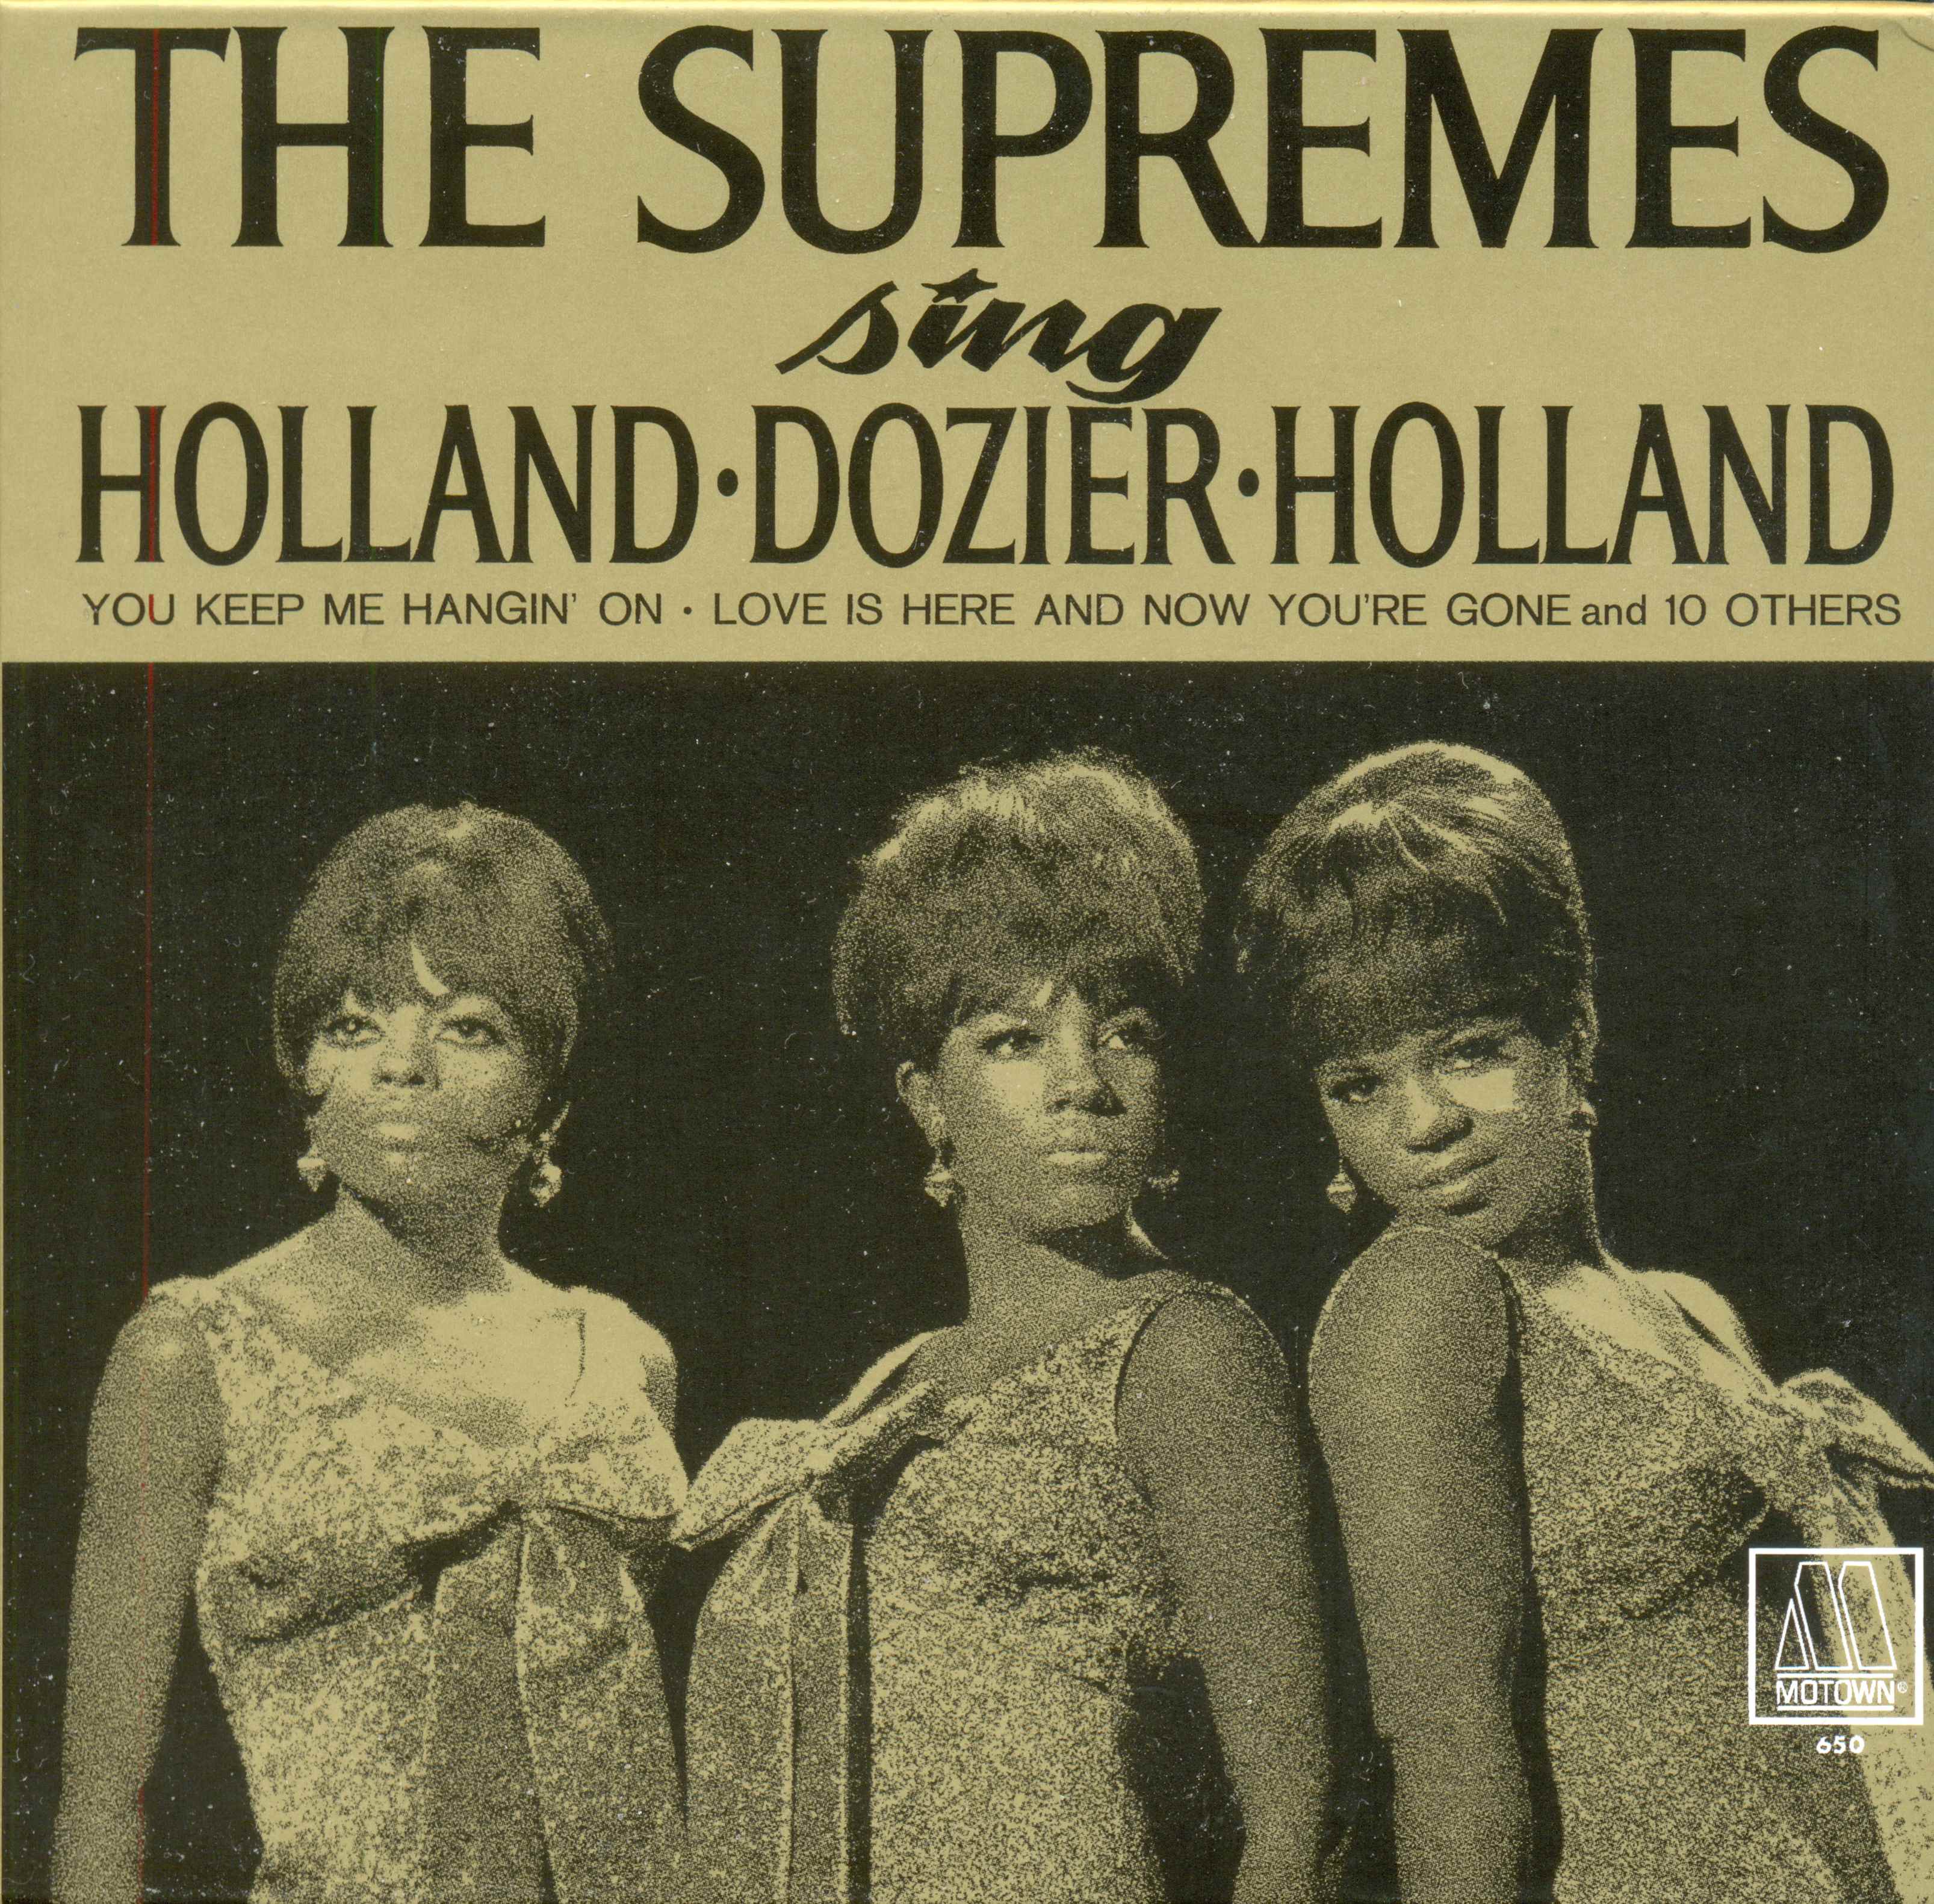 1967 - The Supremes - Sing Holland-Dozier-Holland